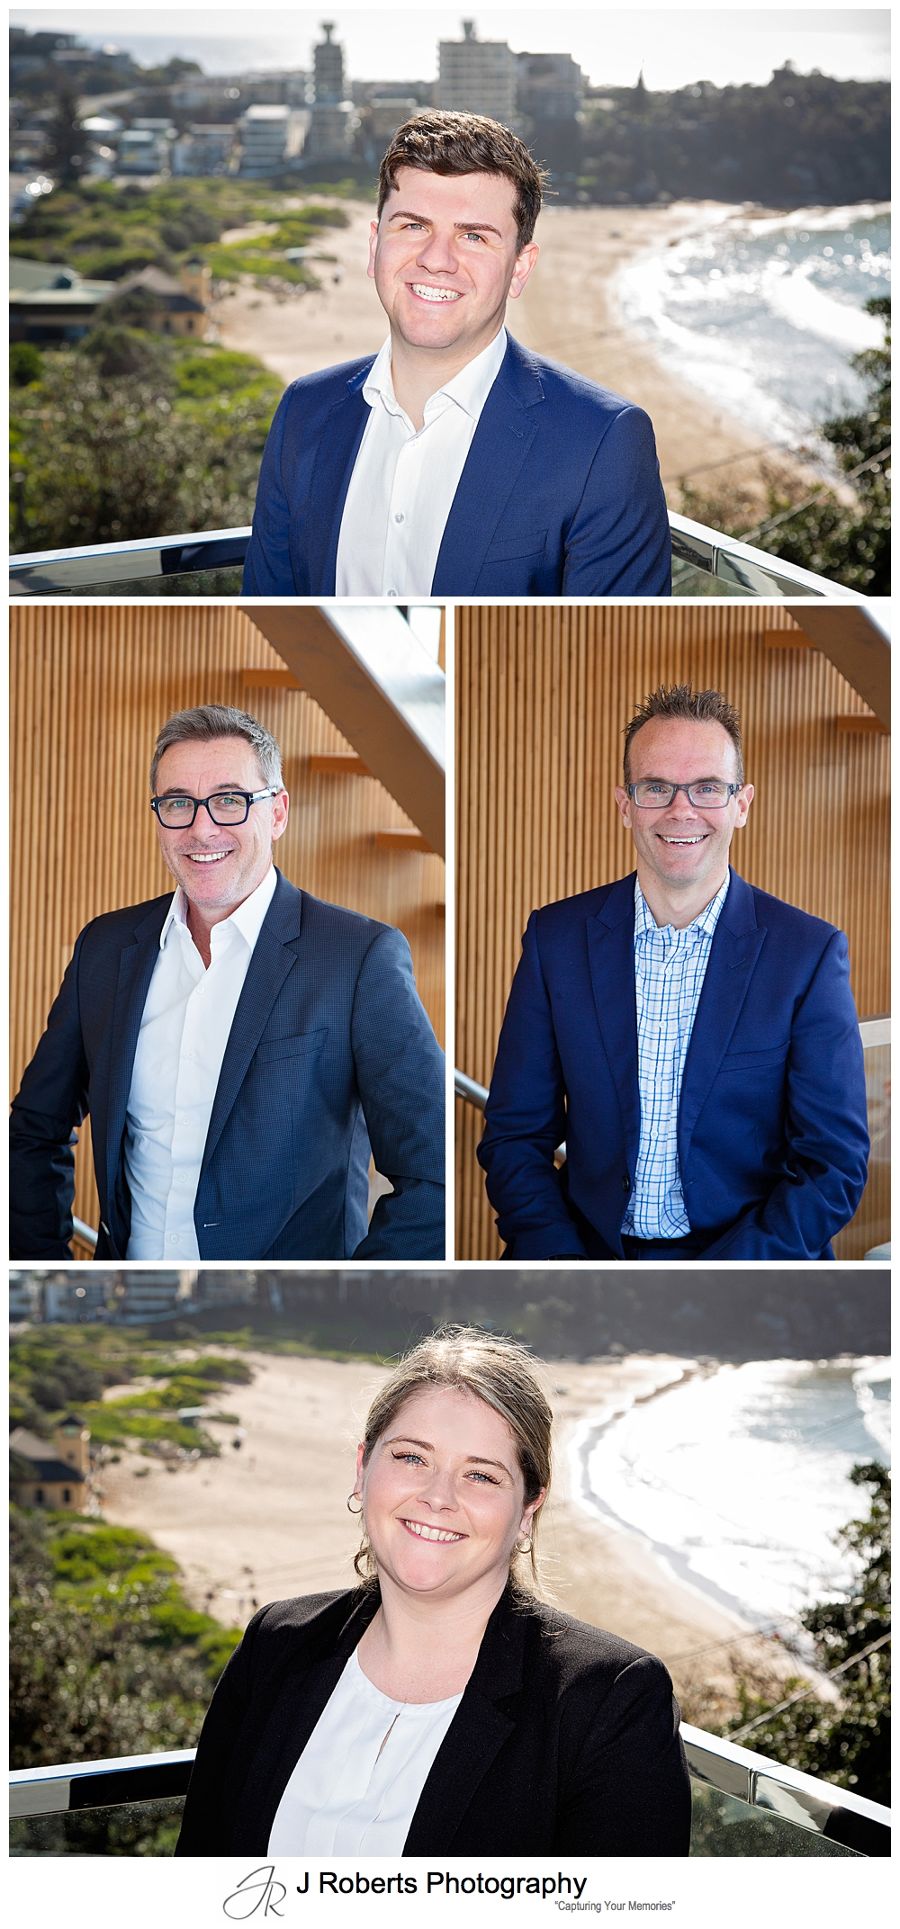 Mentor1 Corporate Headshots at Freshwater Beach Location